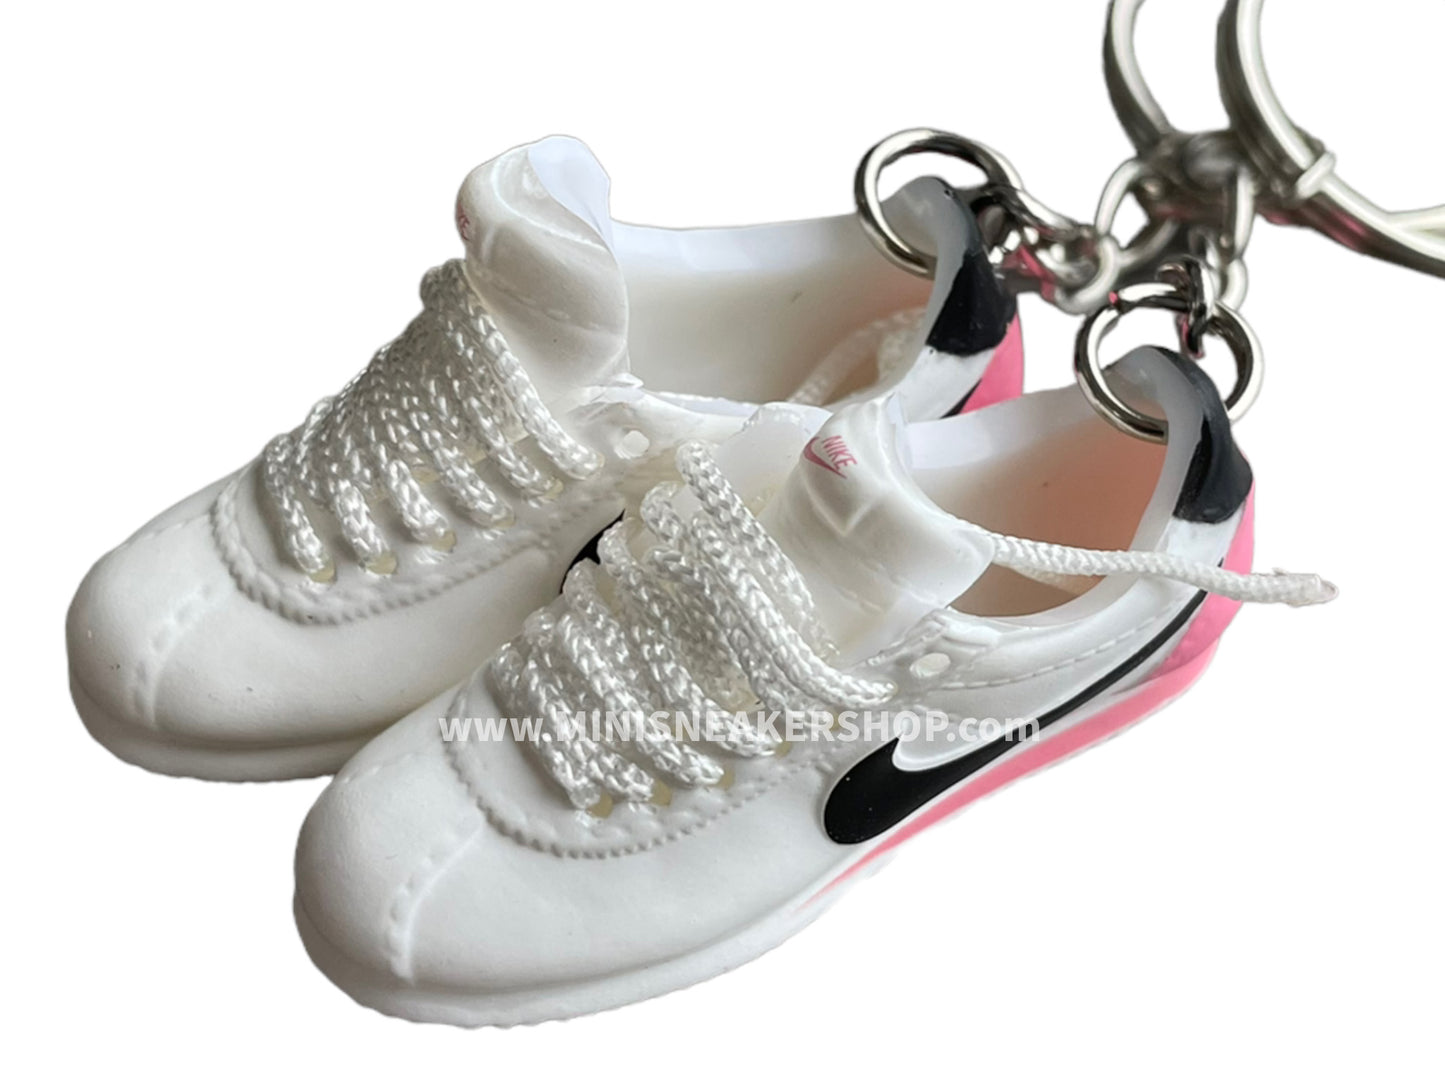 Mini 3D sneaker keychains Nike Cortez  White Red Pink